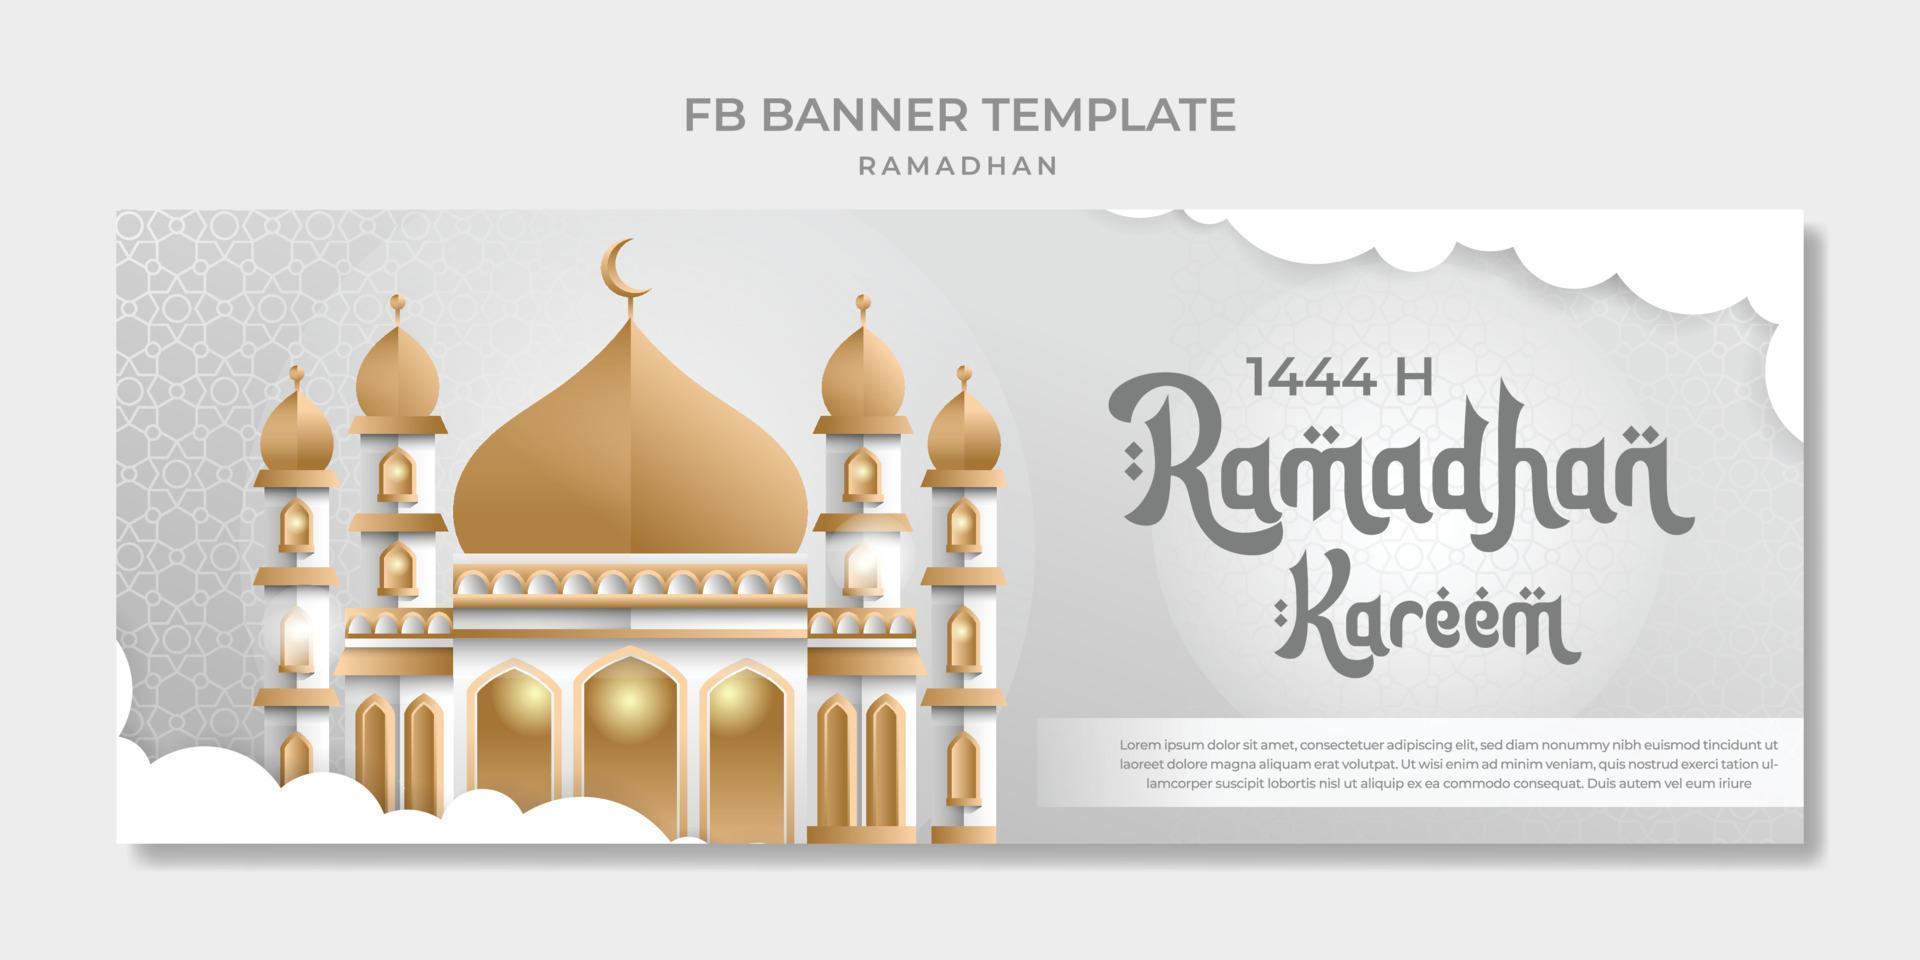 Fb banner vector template ramadhan with mosque image